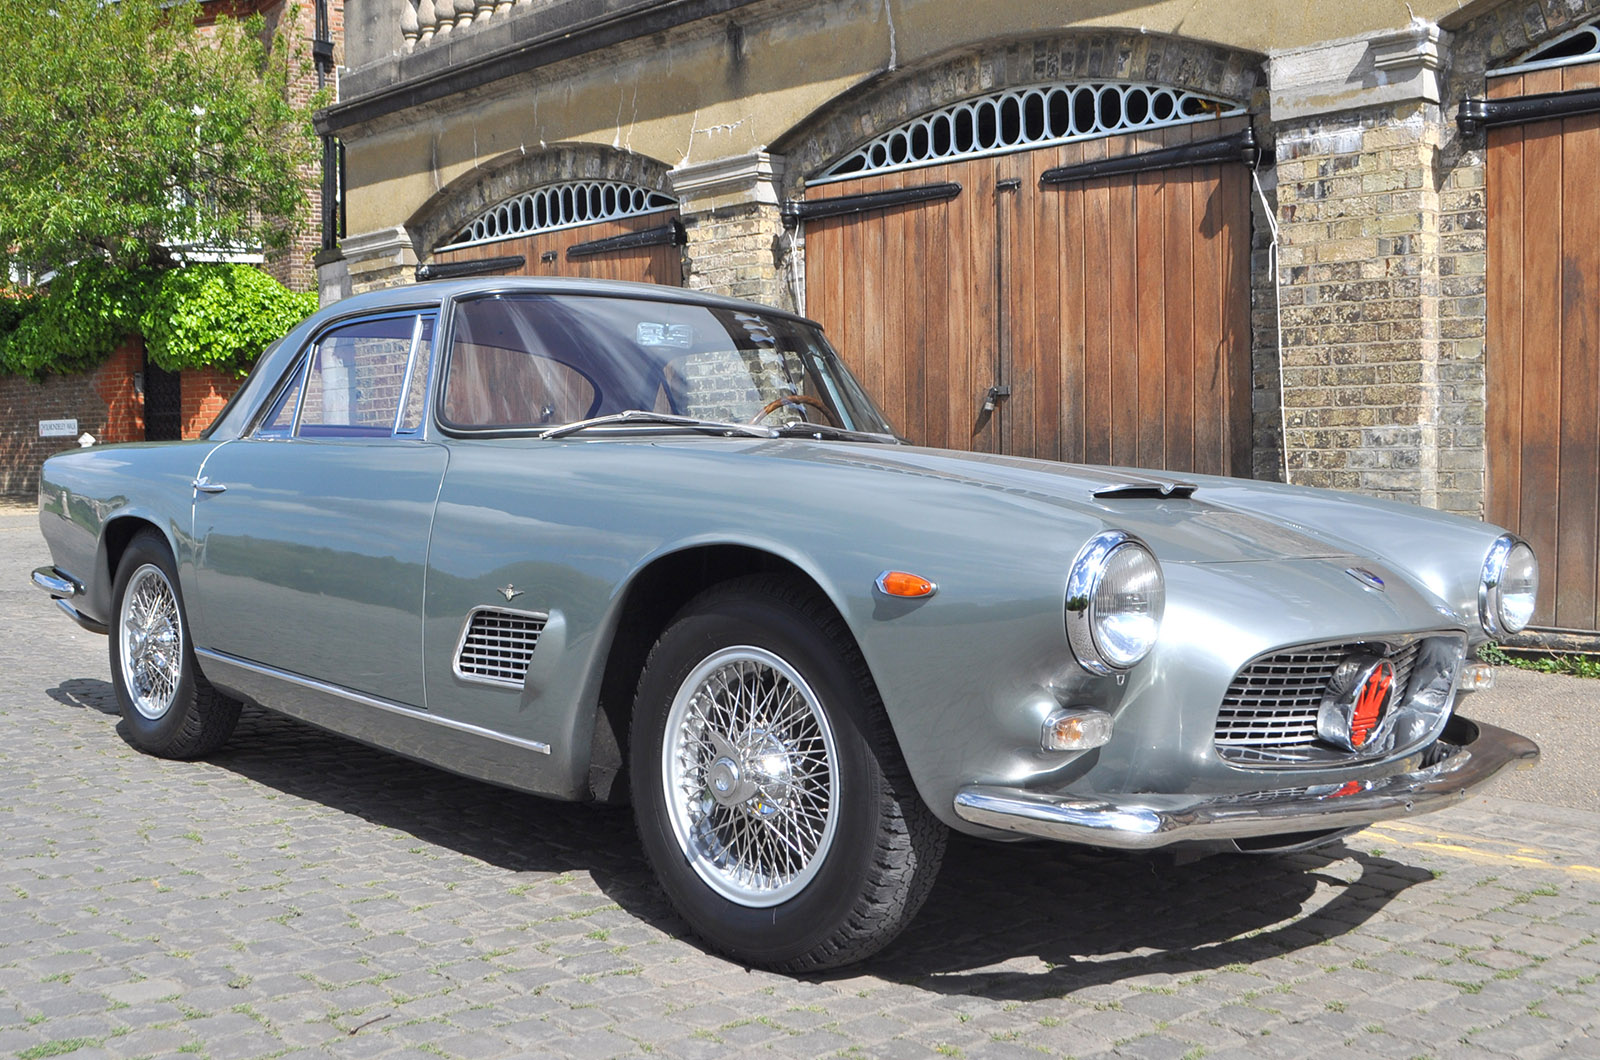 Classic & Sports Car – Legendary 'Birdcage' Maserati going to auction